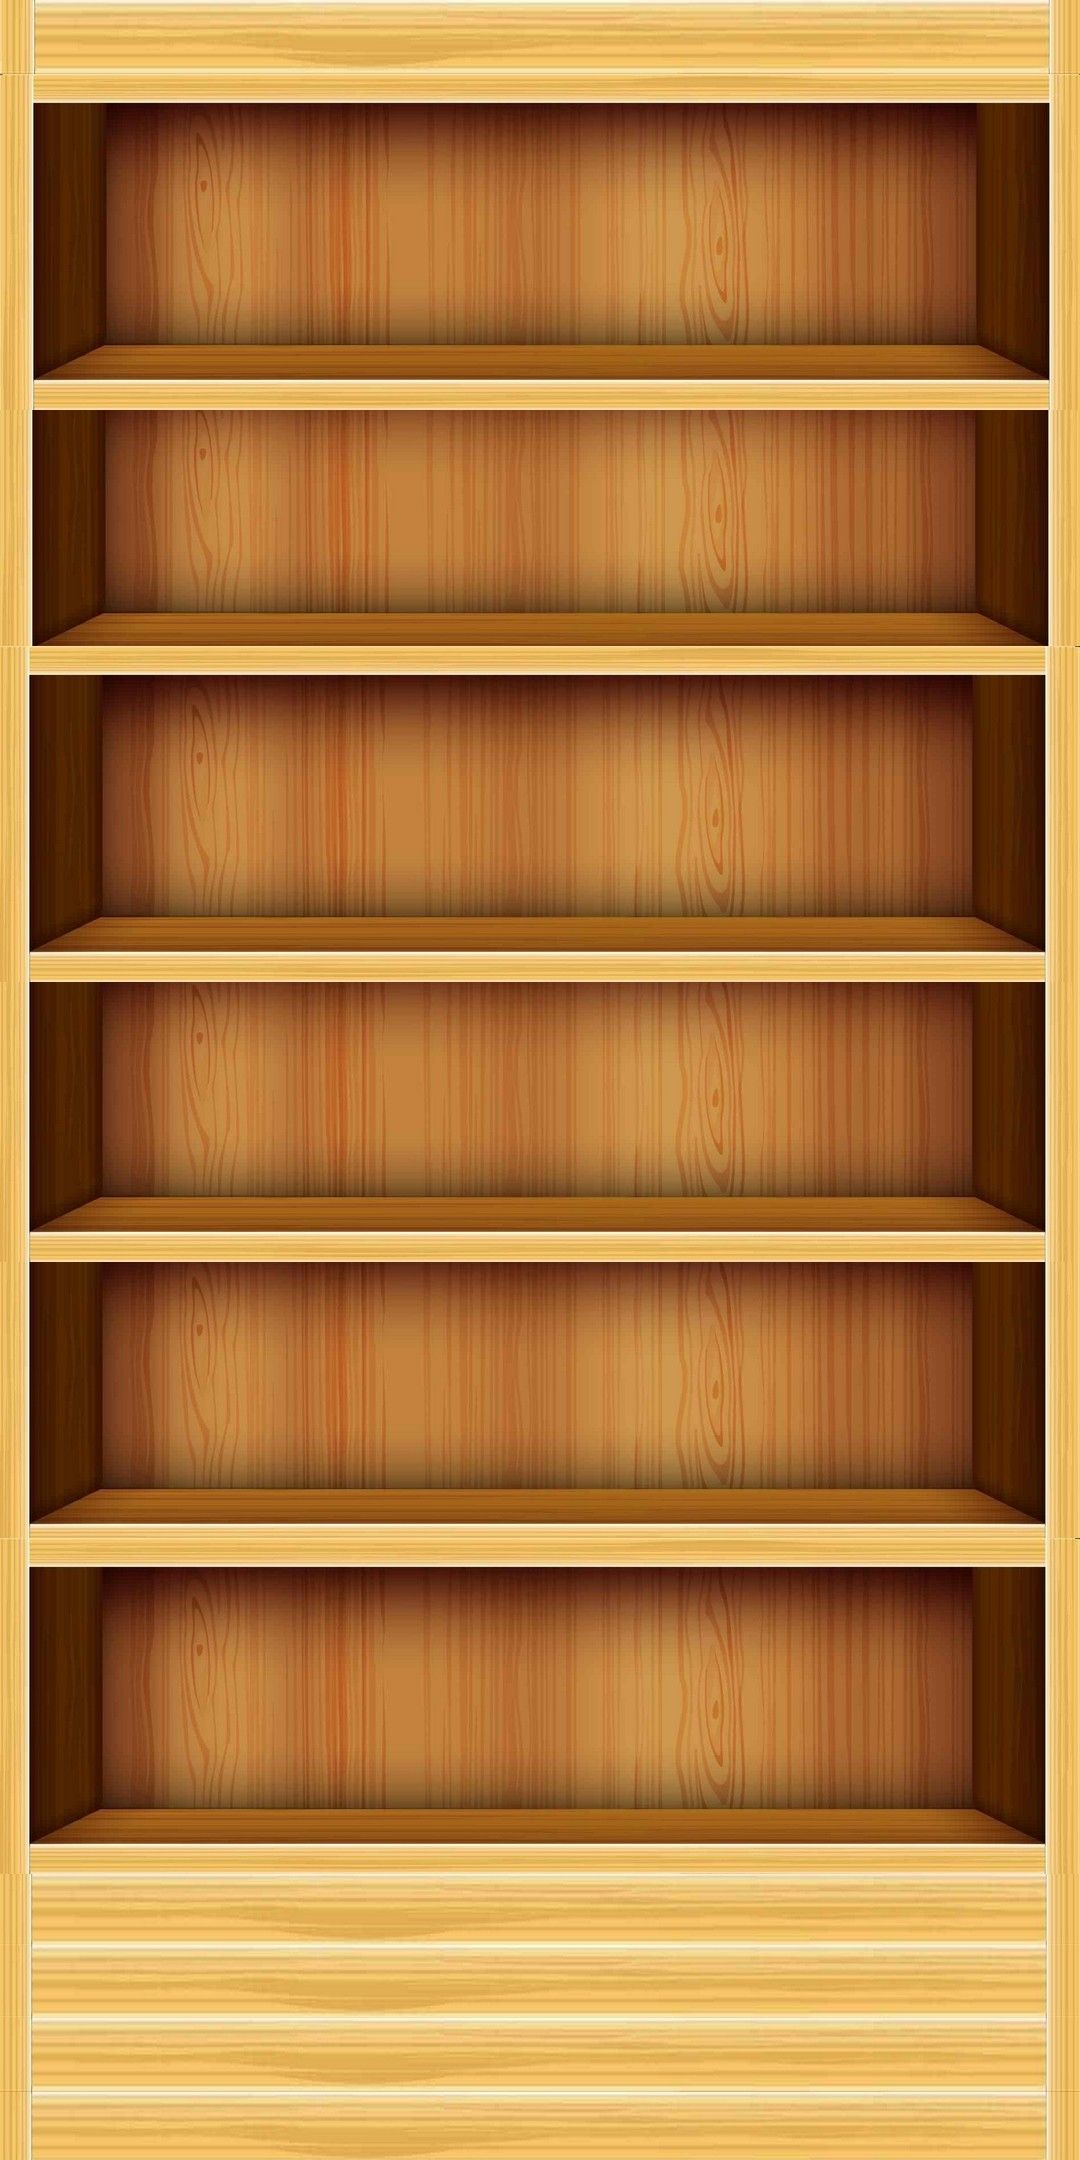 9437 Empty Bookshelf Photos and Premium High Res Pictures  Getty Images